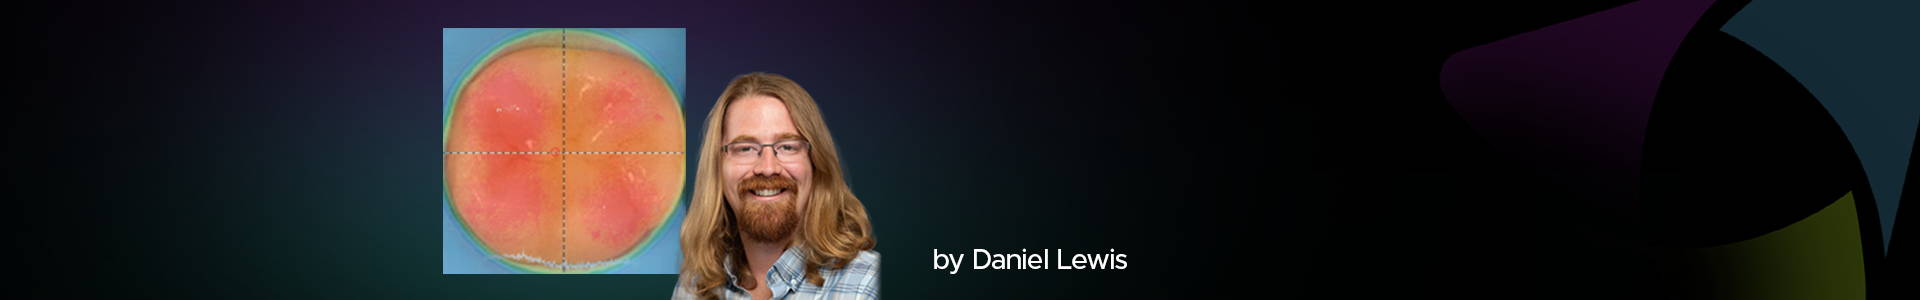 blog banner featuring Daniel Lewis and a clinical image